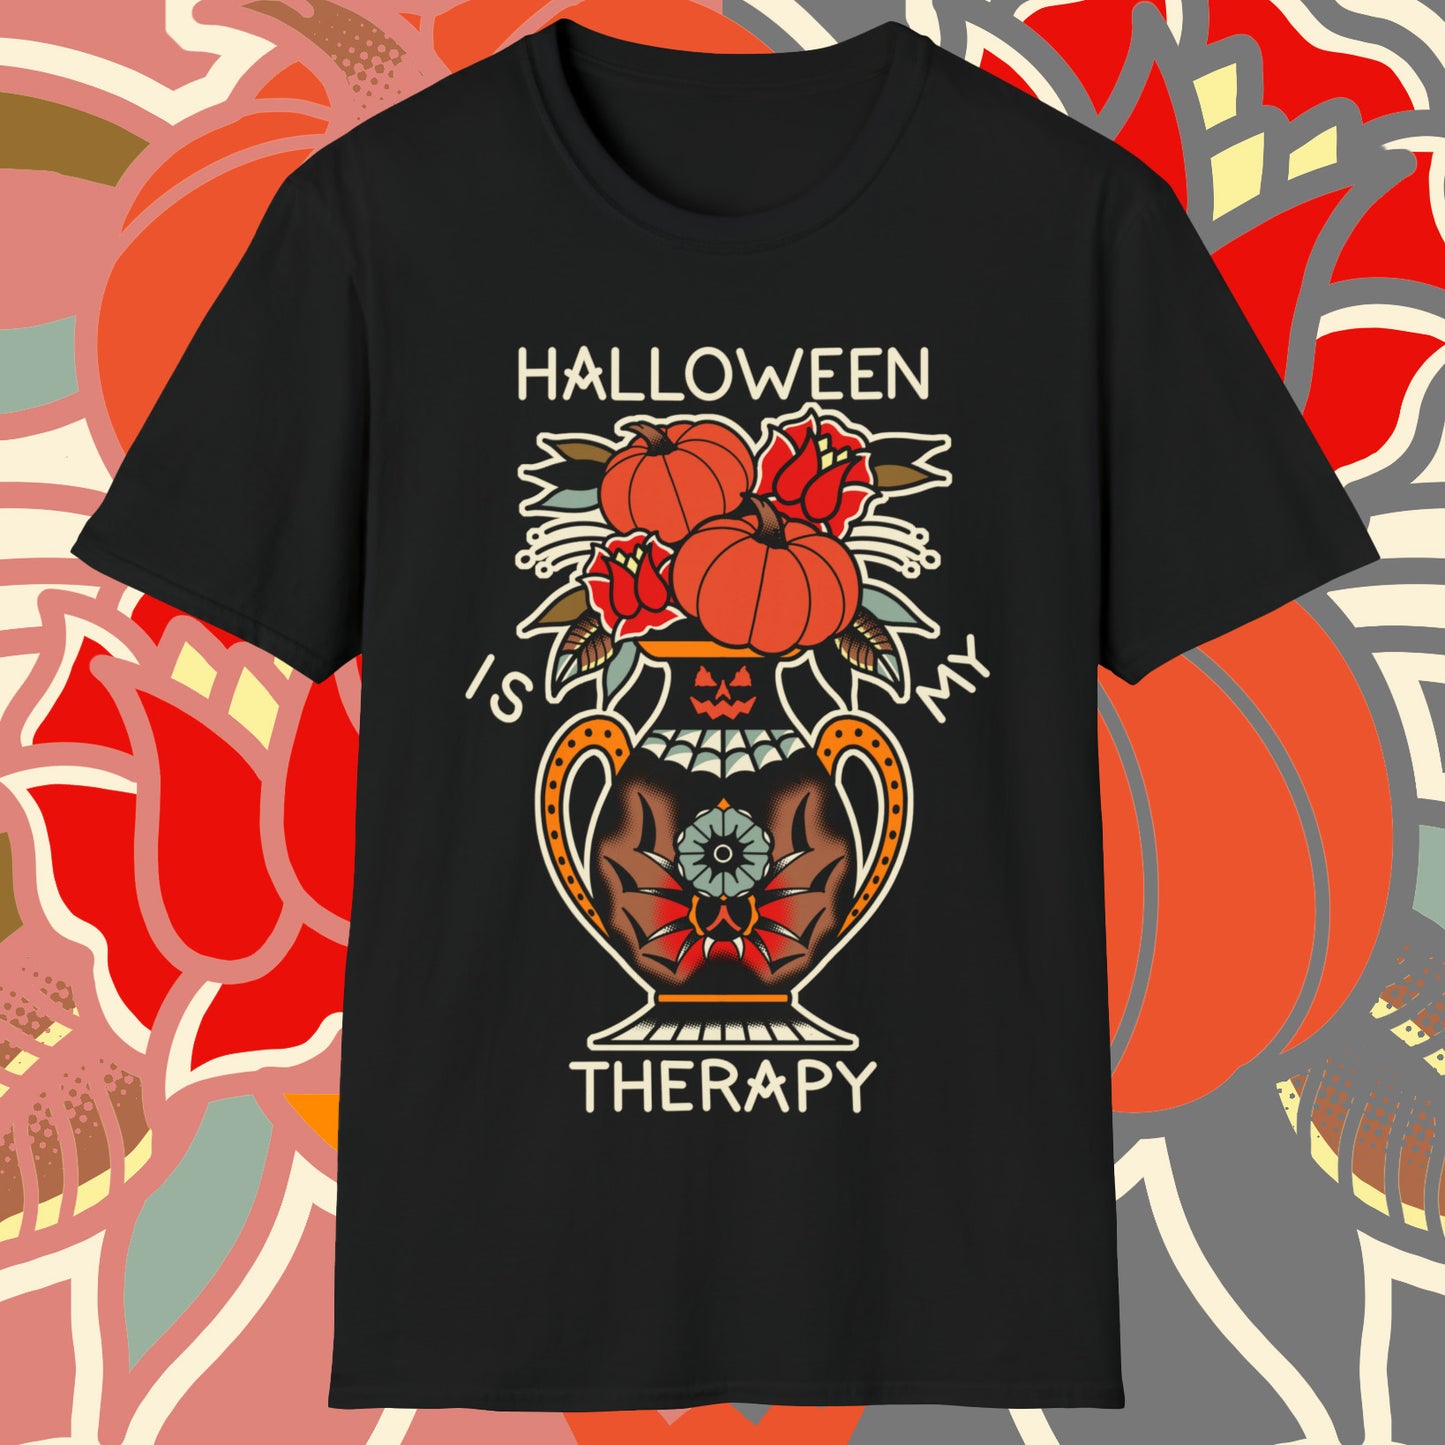 Halloween Therapy Shirt